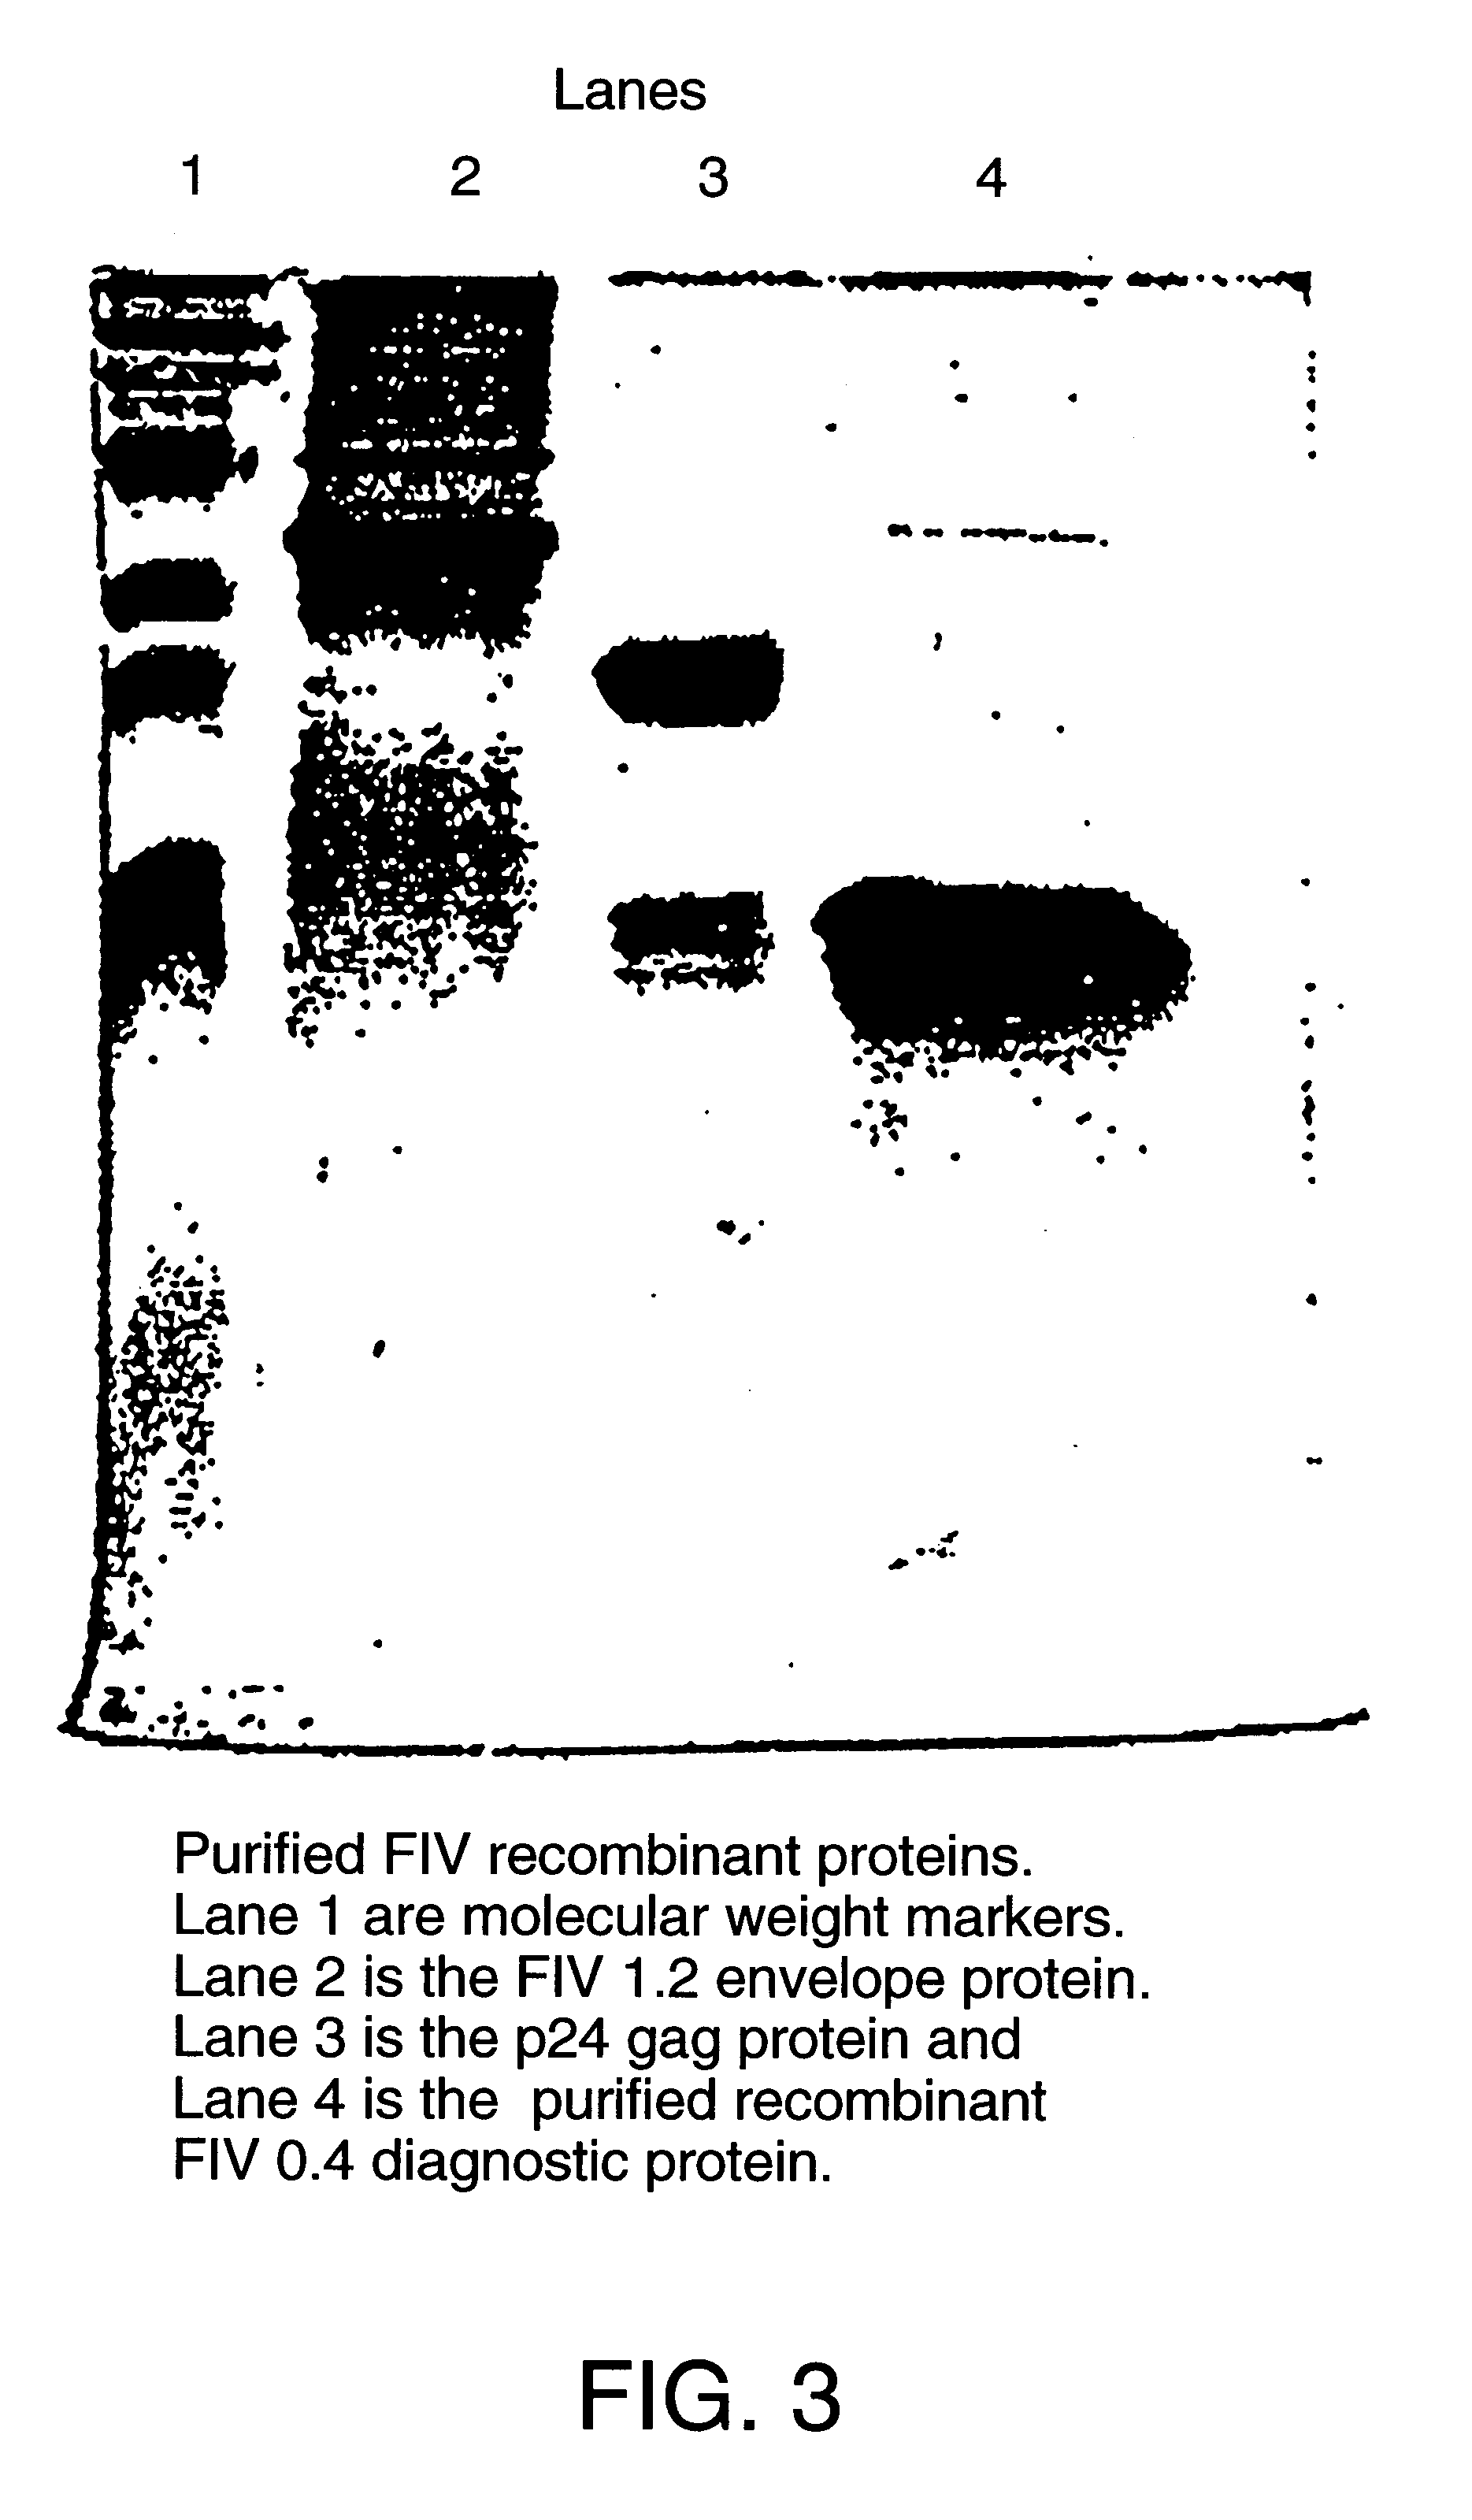 Recombinant FIV glycoprotein 160 and P24 gag protein